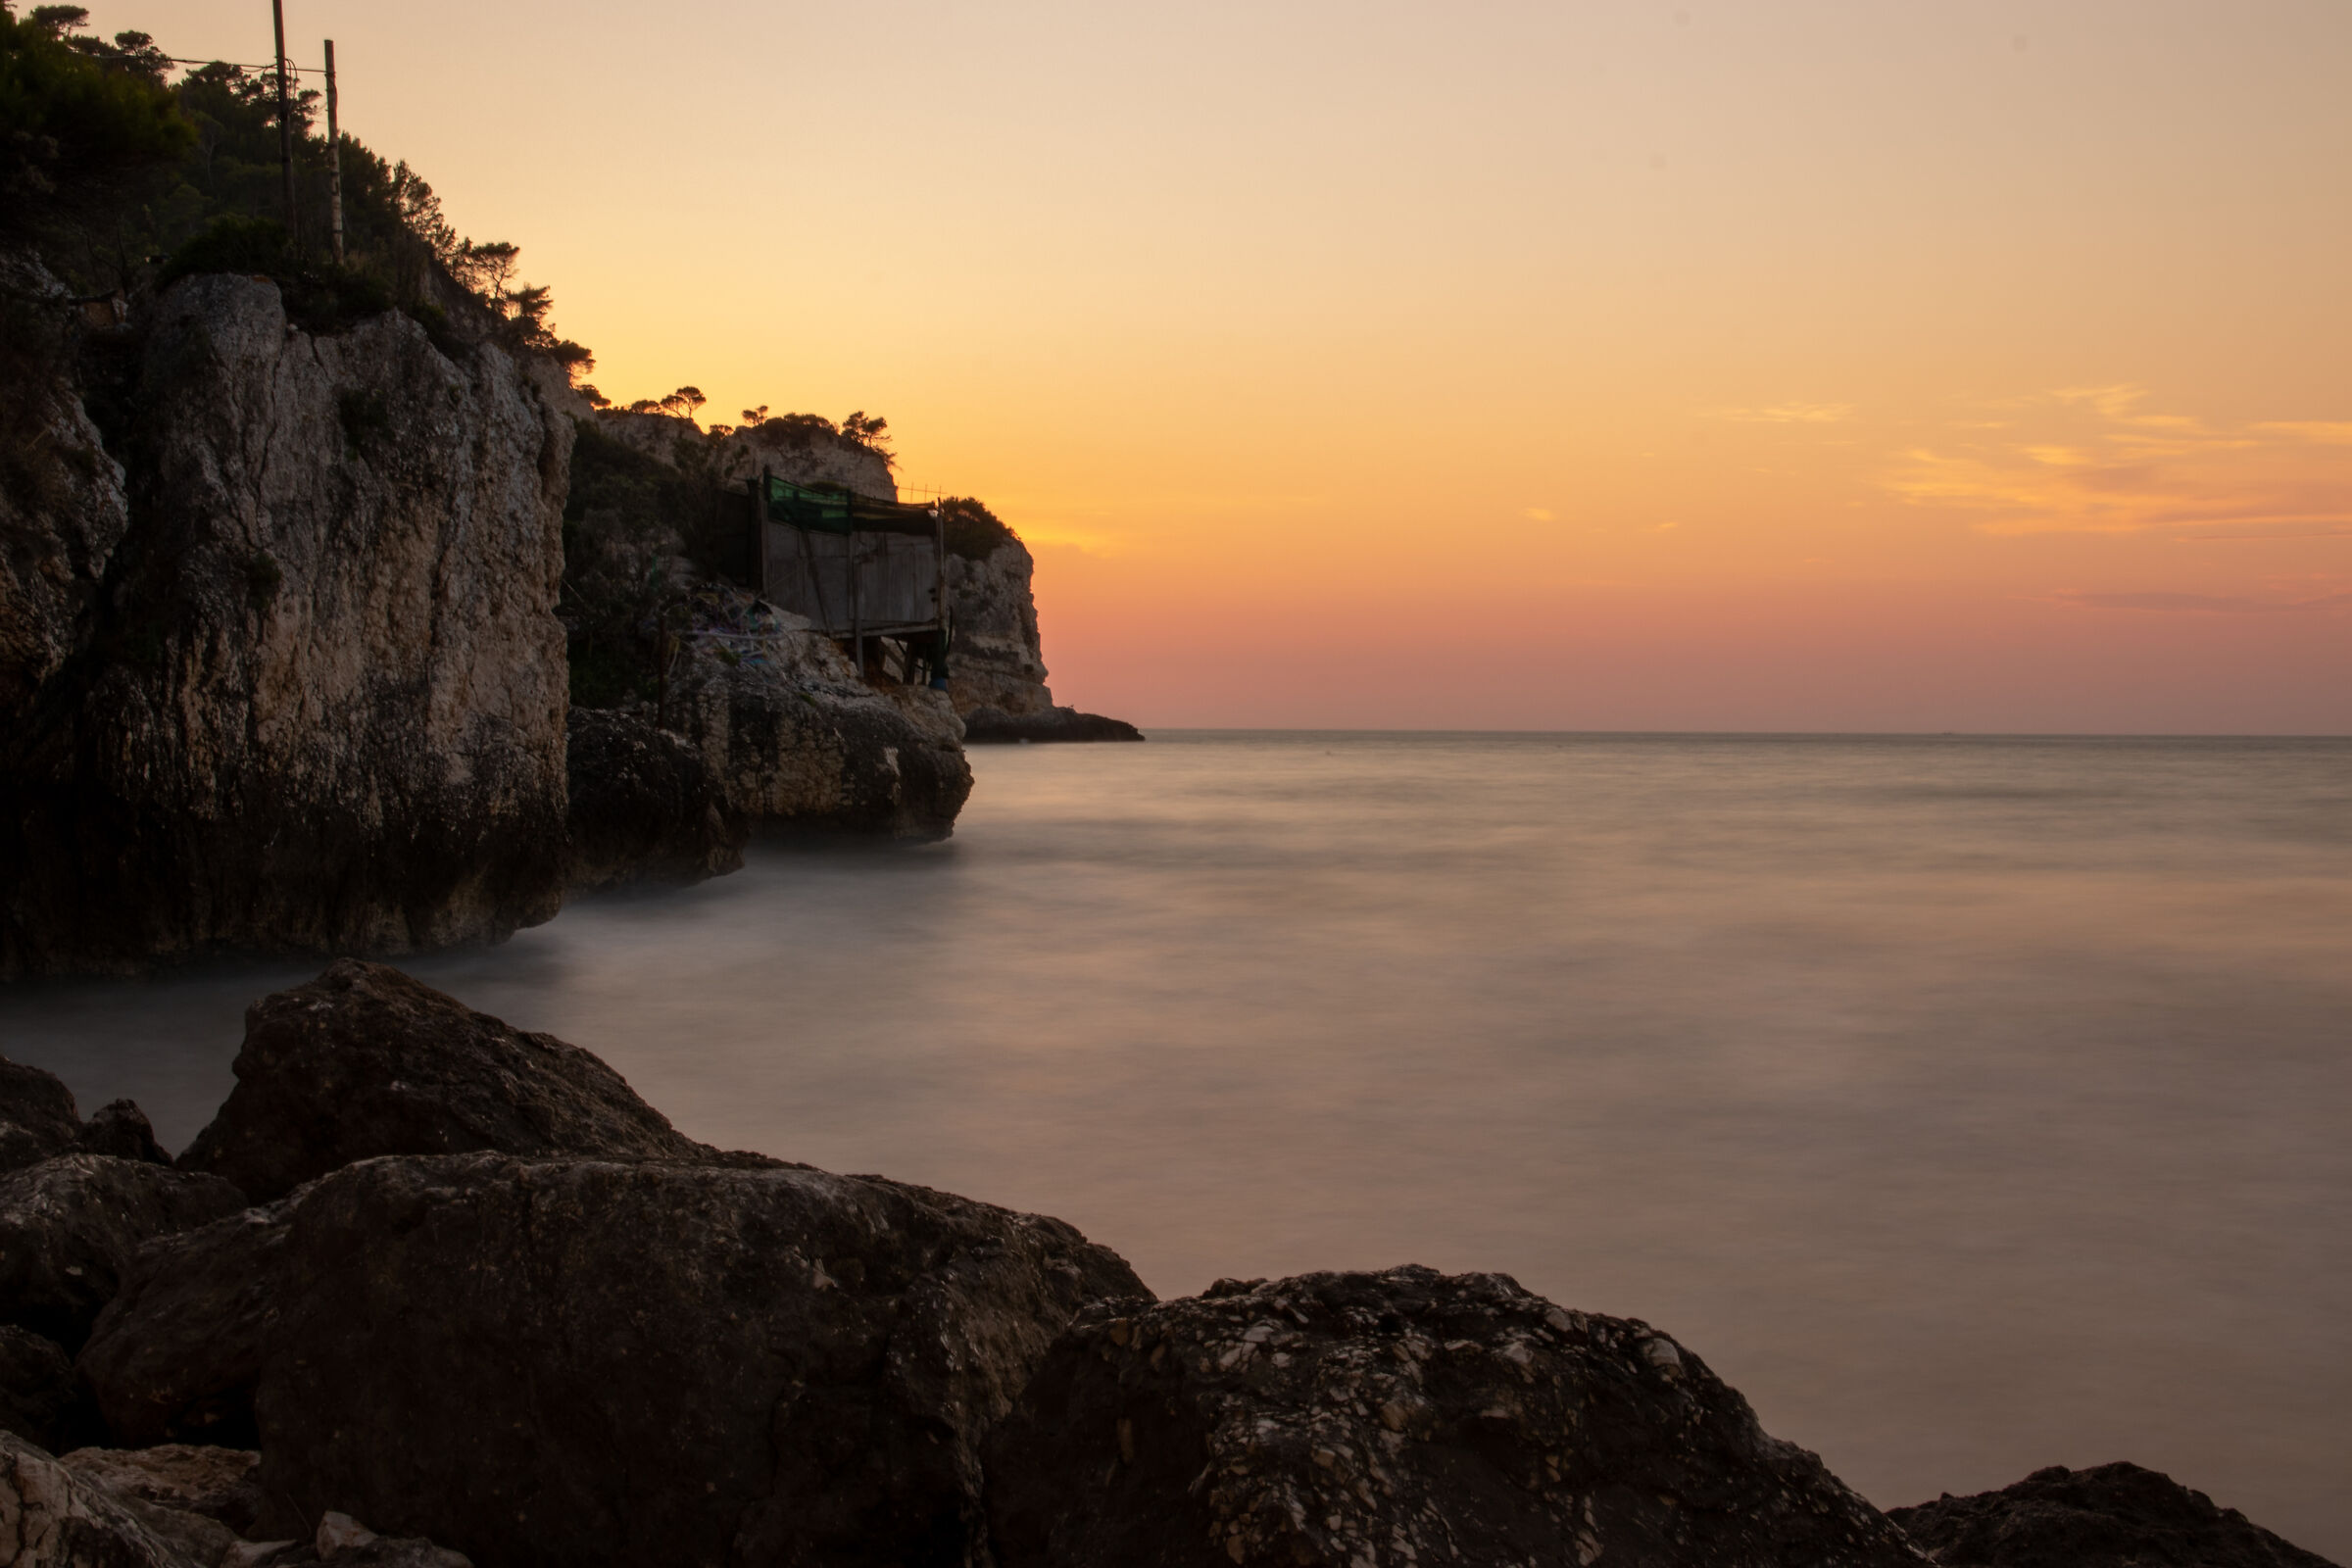 The sunset in Peschici (long exposure)...